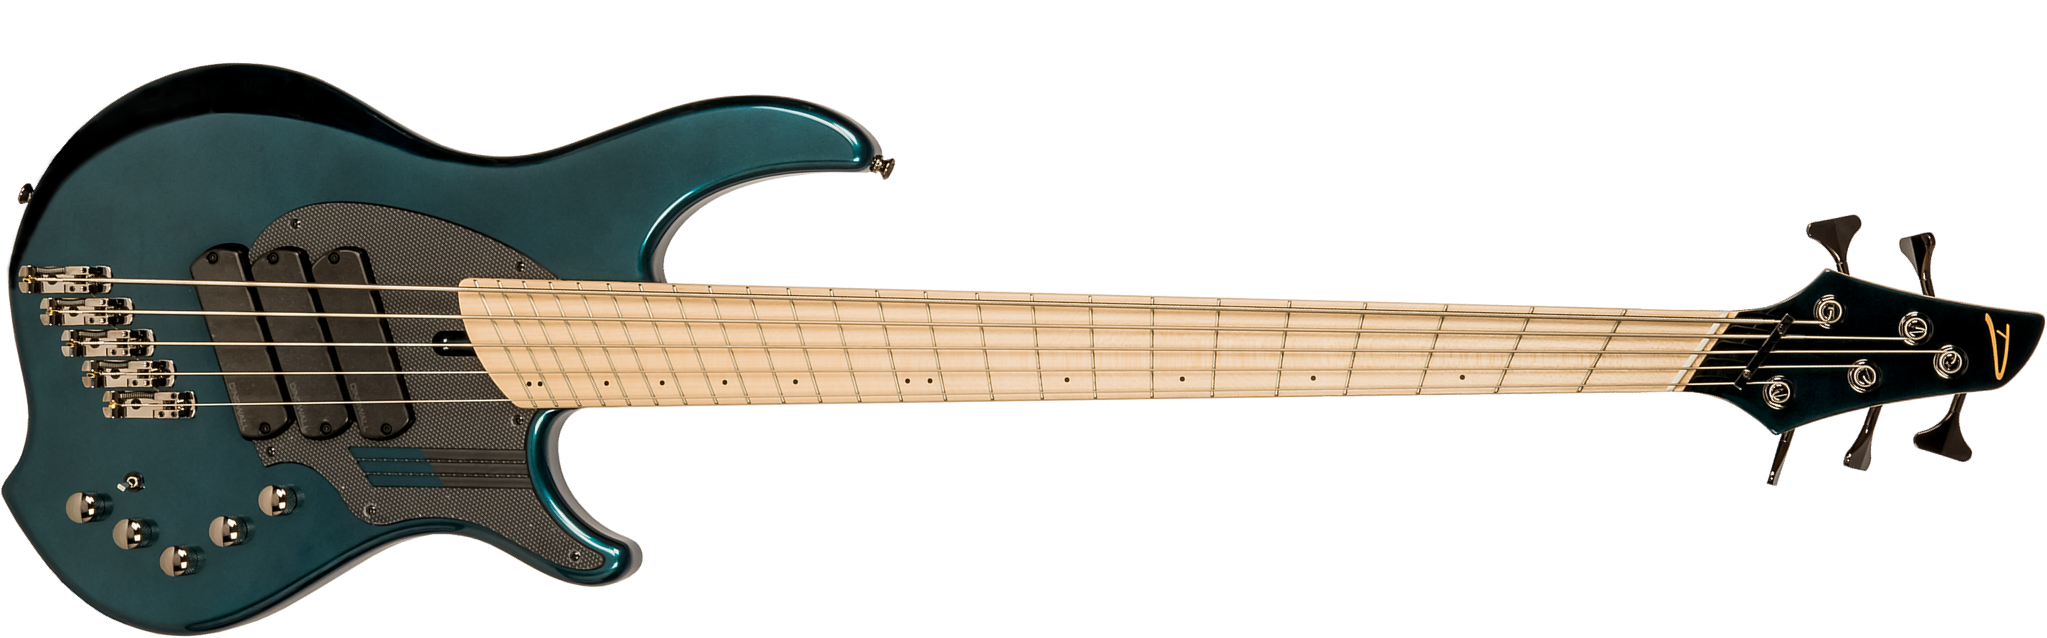 Dingwall Adam Nolly Getgood Ng3 5c Signature 3pu Active Mn - Black Forrest Green - Solidbody E-bass - Main picture